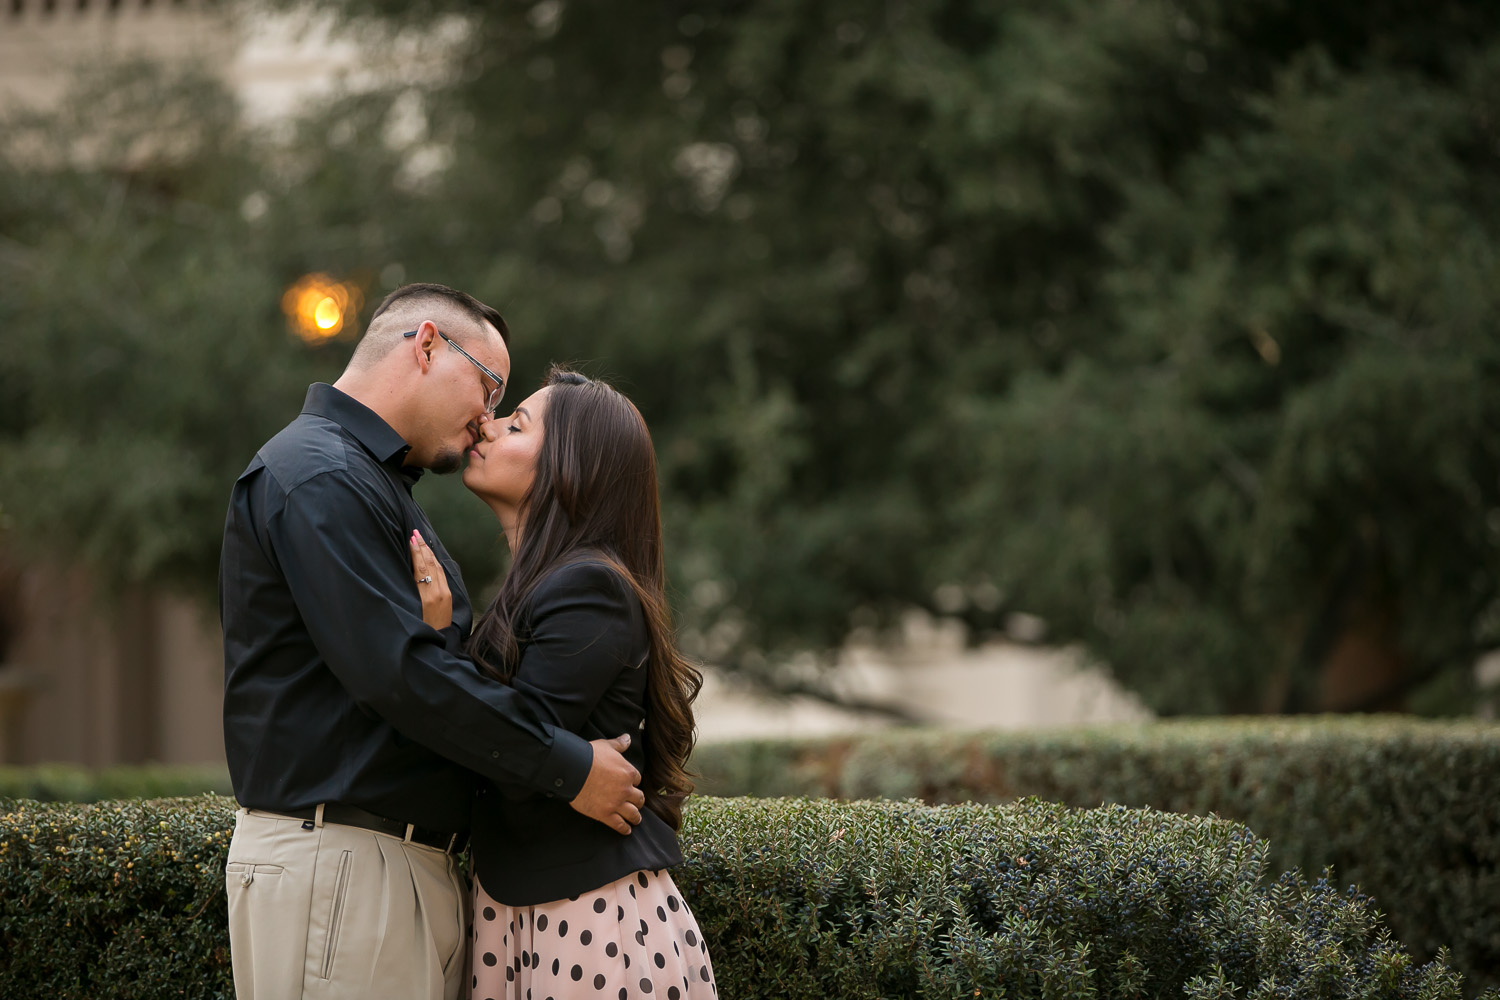 pasadena city hall, engagement session, love, engaged, fiance, water fountain, park bench, chris holt photography, los angeles wedding photography